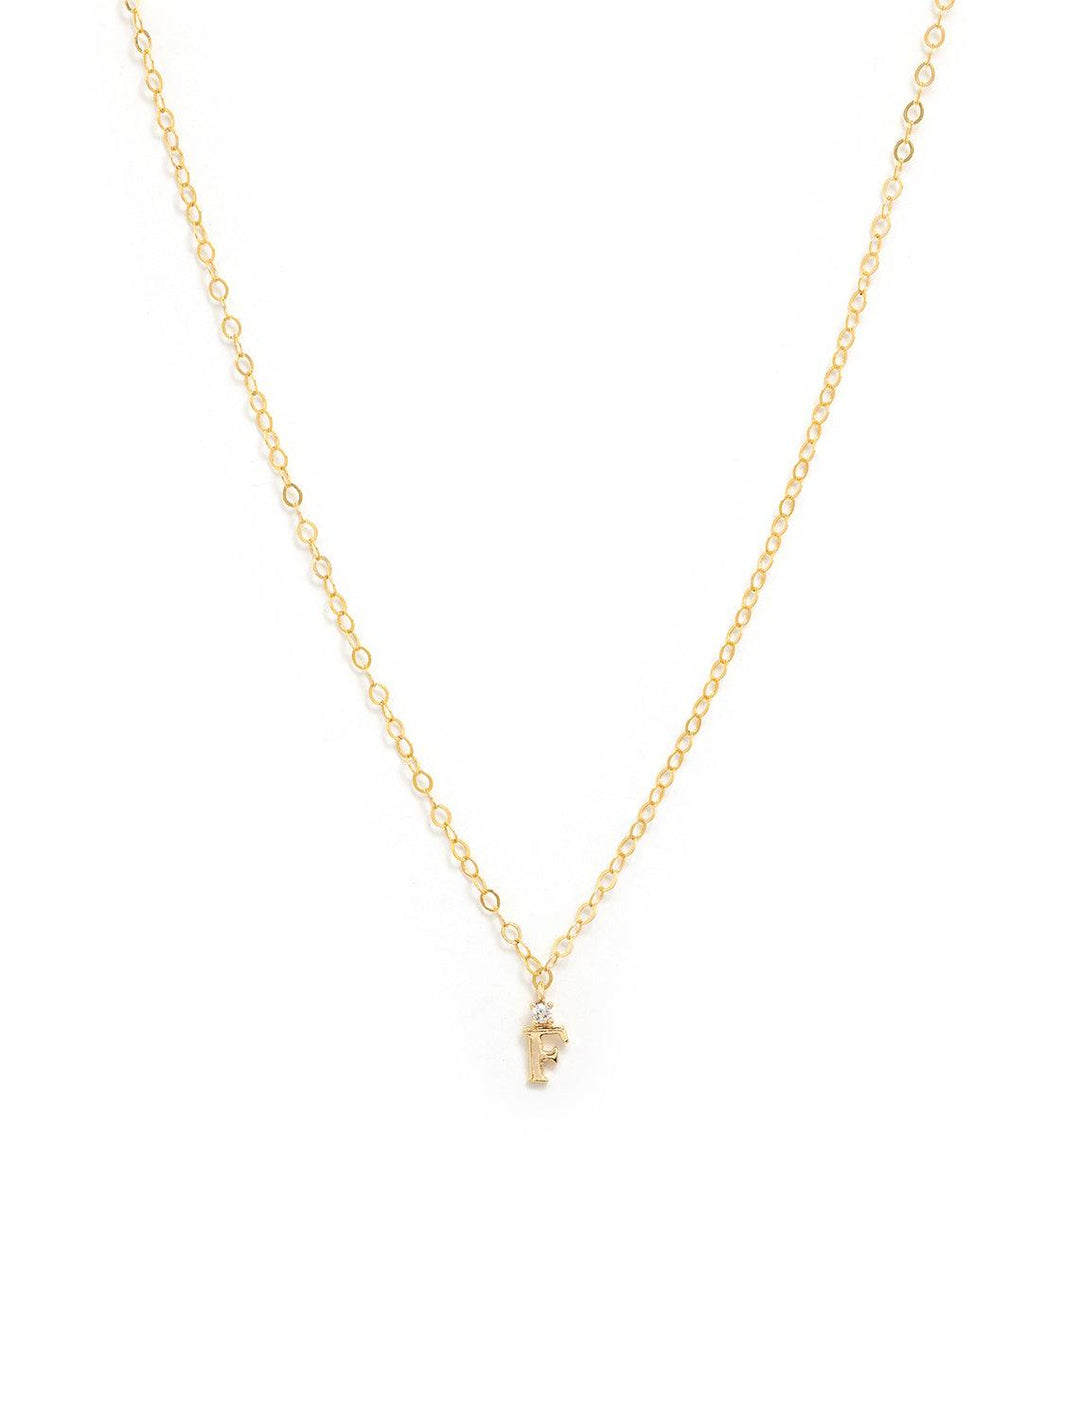 Marit Rae initial and cz necklace in gold | F - Twigs